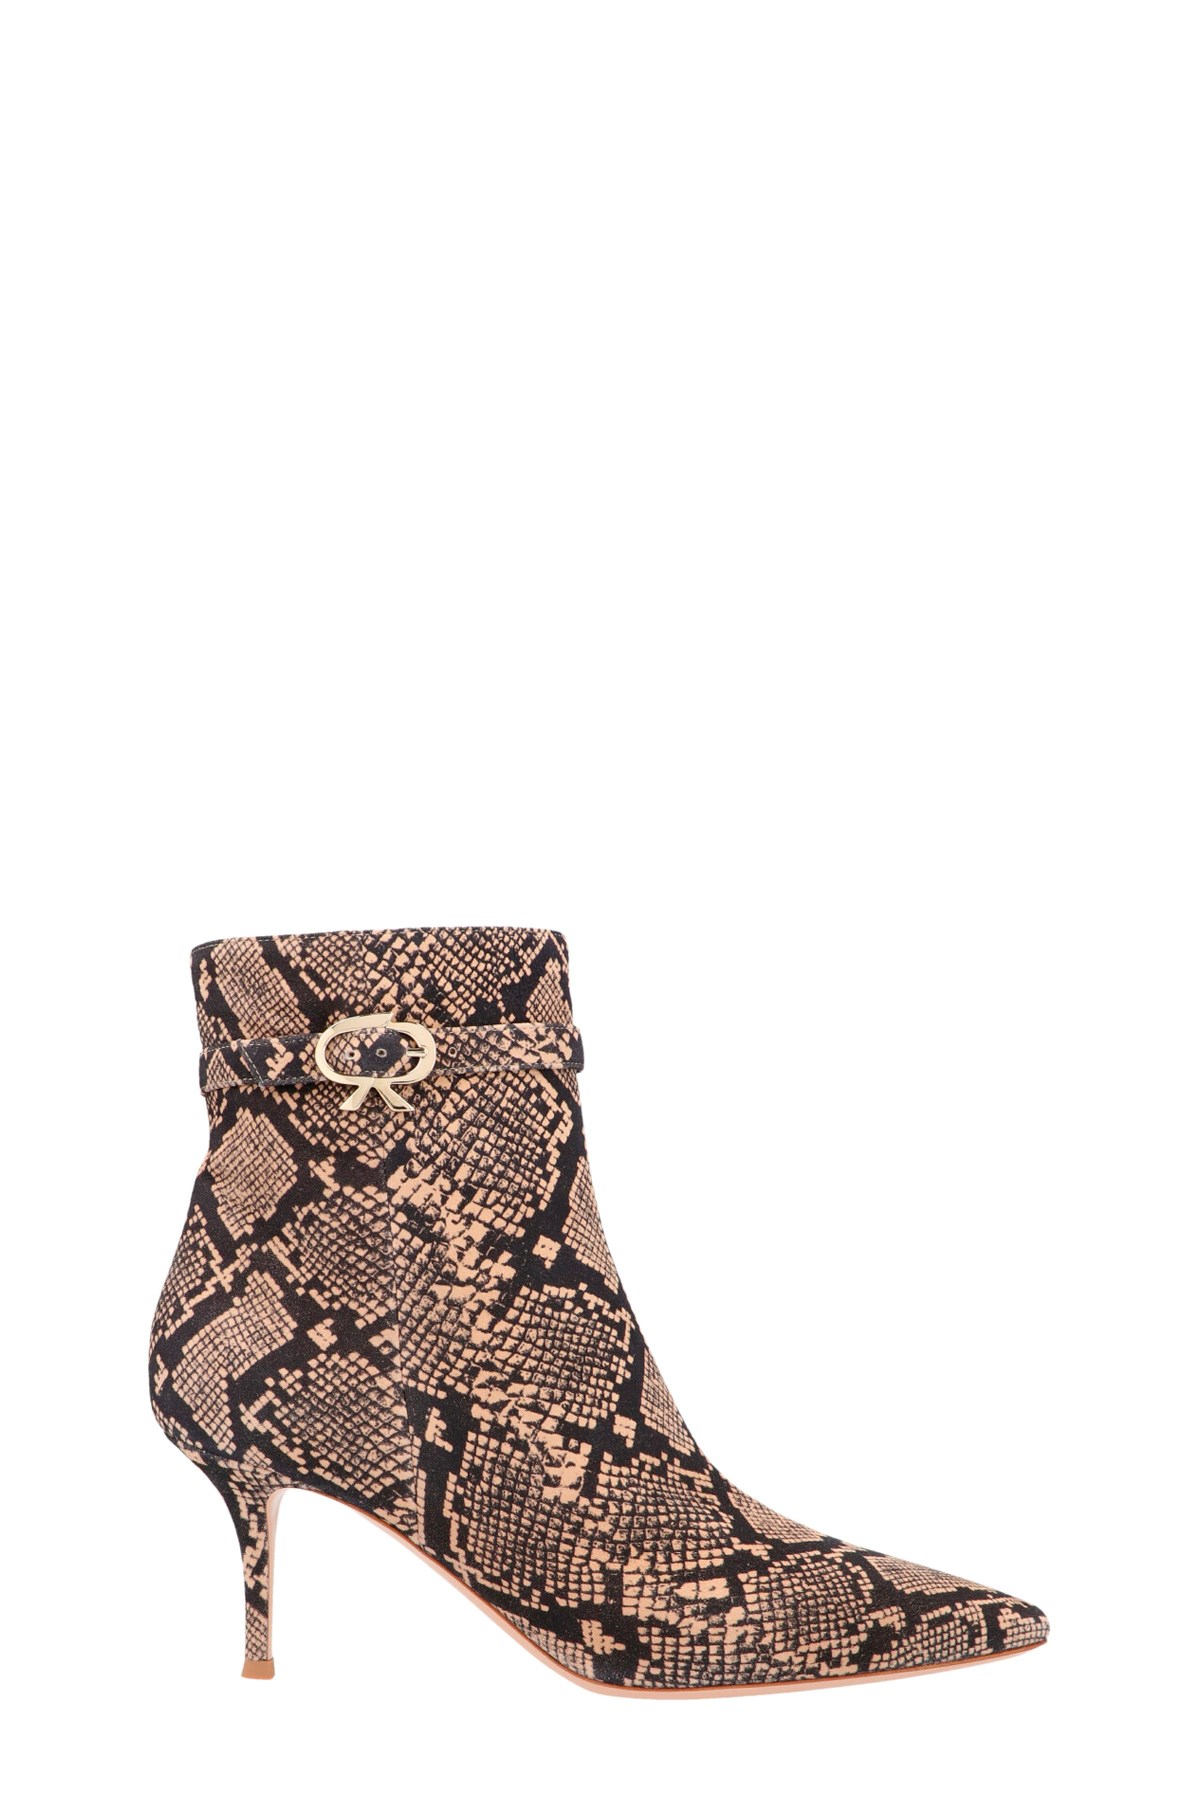 GIANVITO ROSSI 'Remy' Animalier Ankle Boots